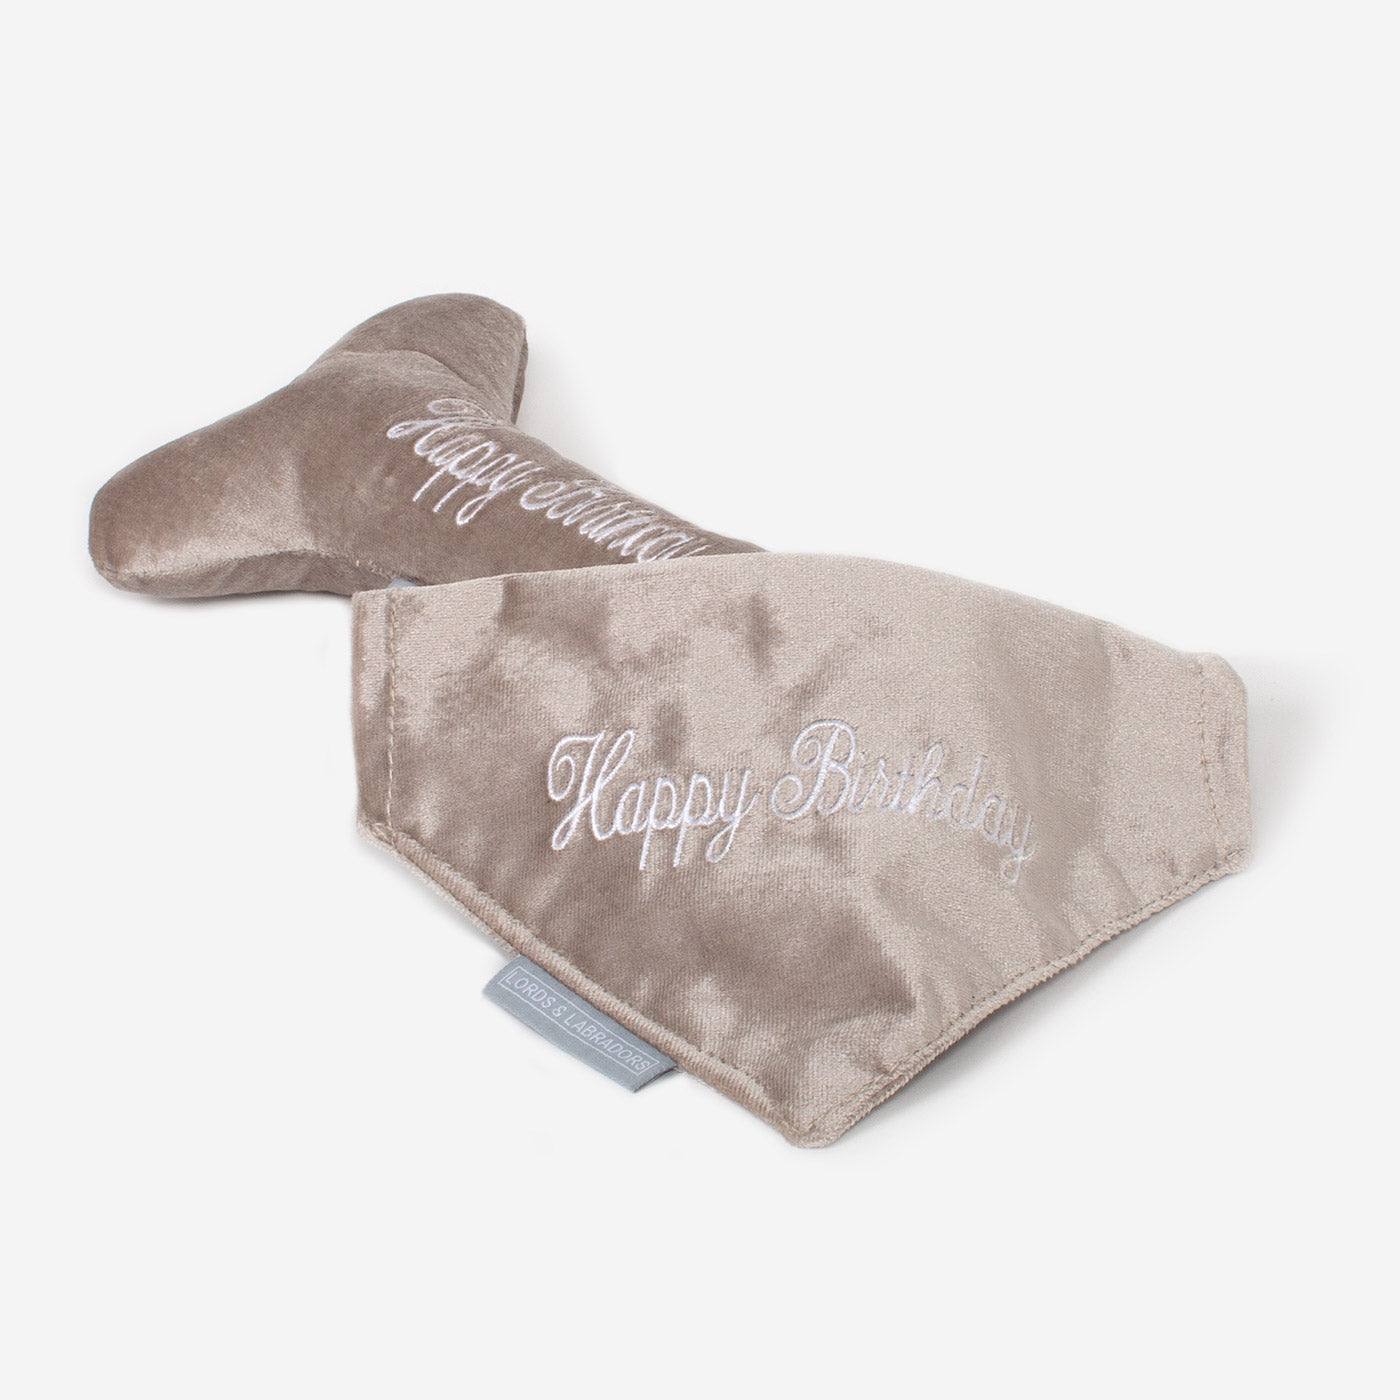 [colour:happy birthday] Present The Perfect Pet Playtime With Our Luxury 'Happy Birthday' Dog Bandana, In Stunning Mushroom Velvet! Available Now at Lords & Labradors US